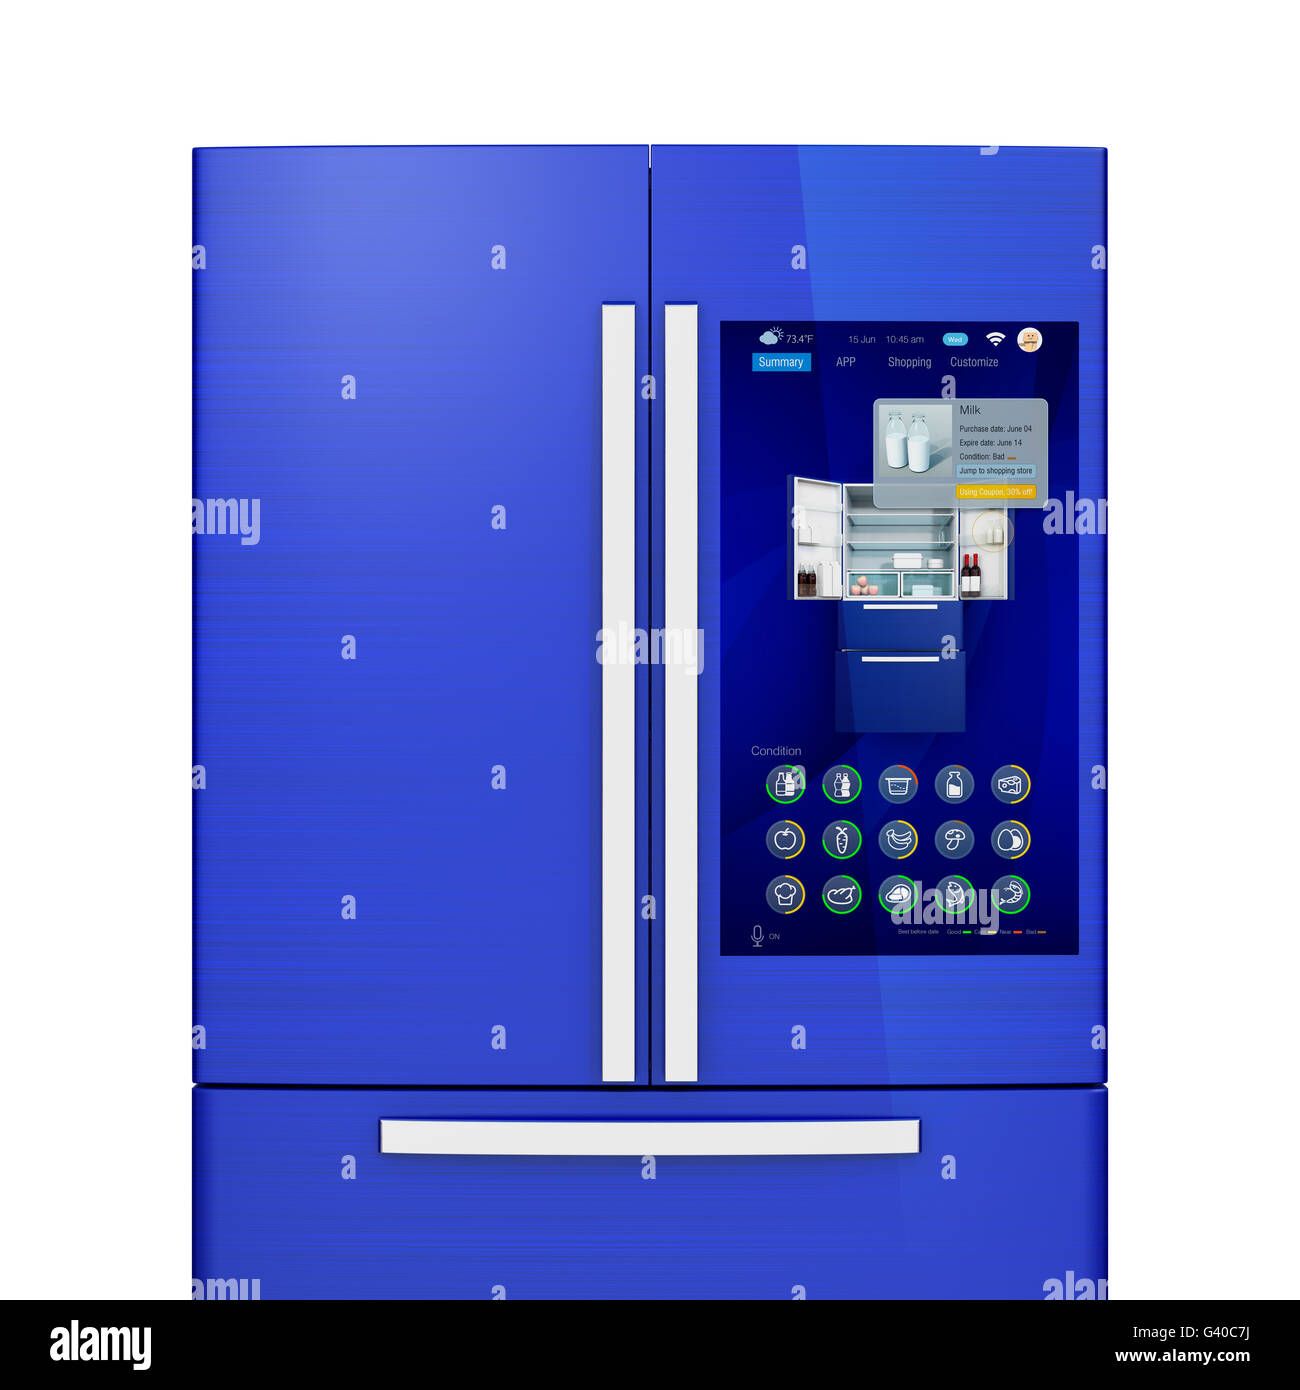 Front view of smart refrigerator. User can manage food or purchase new one by touch screen interface. 3D rendering image. Stock Photo